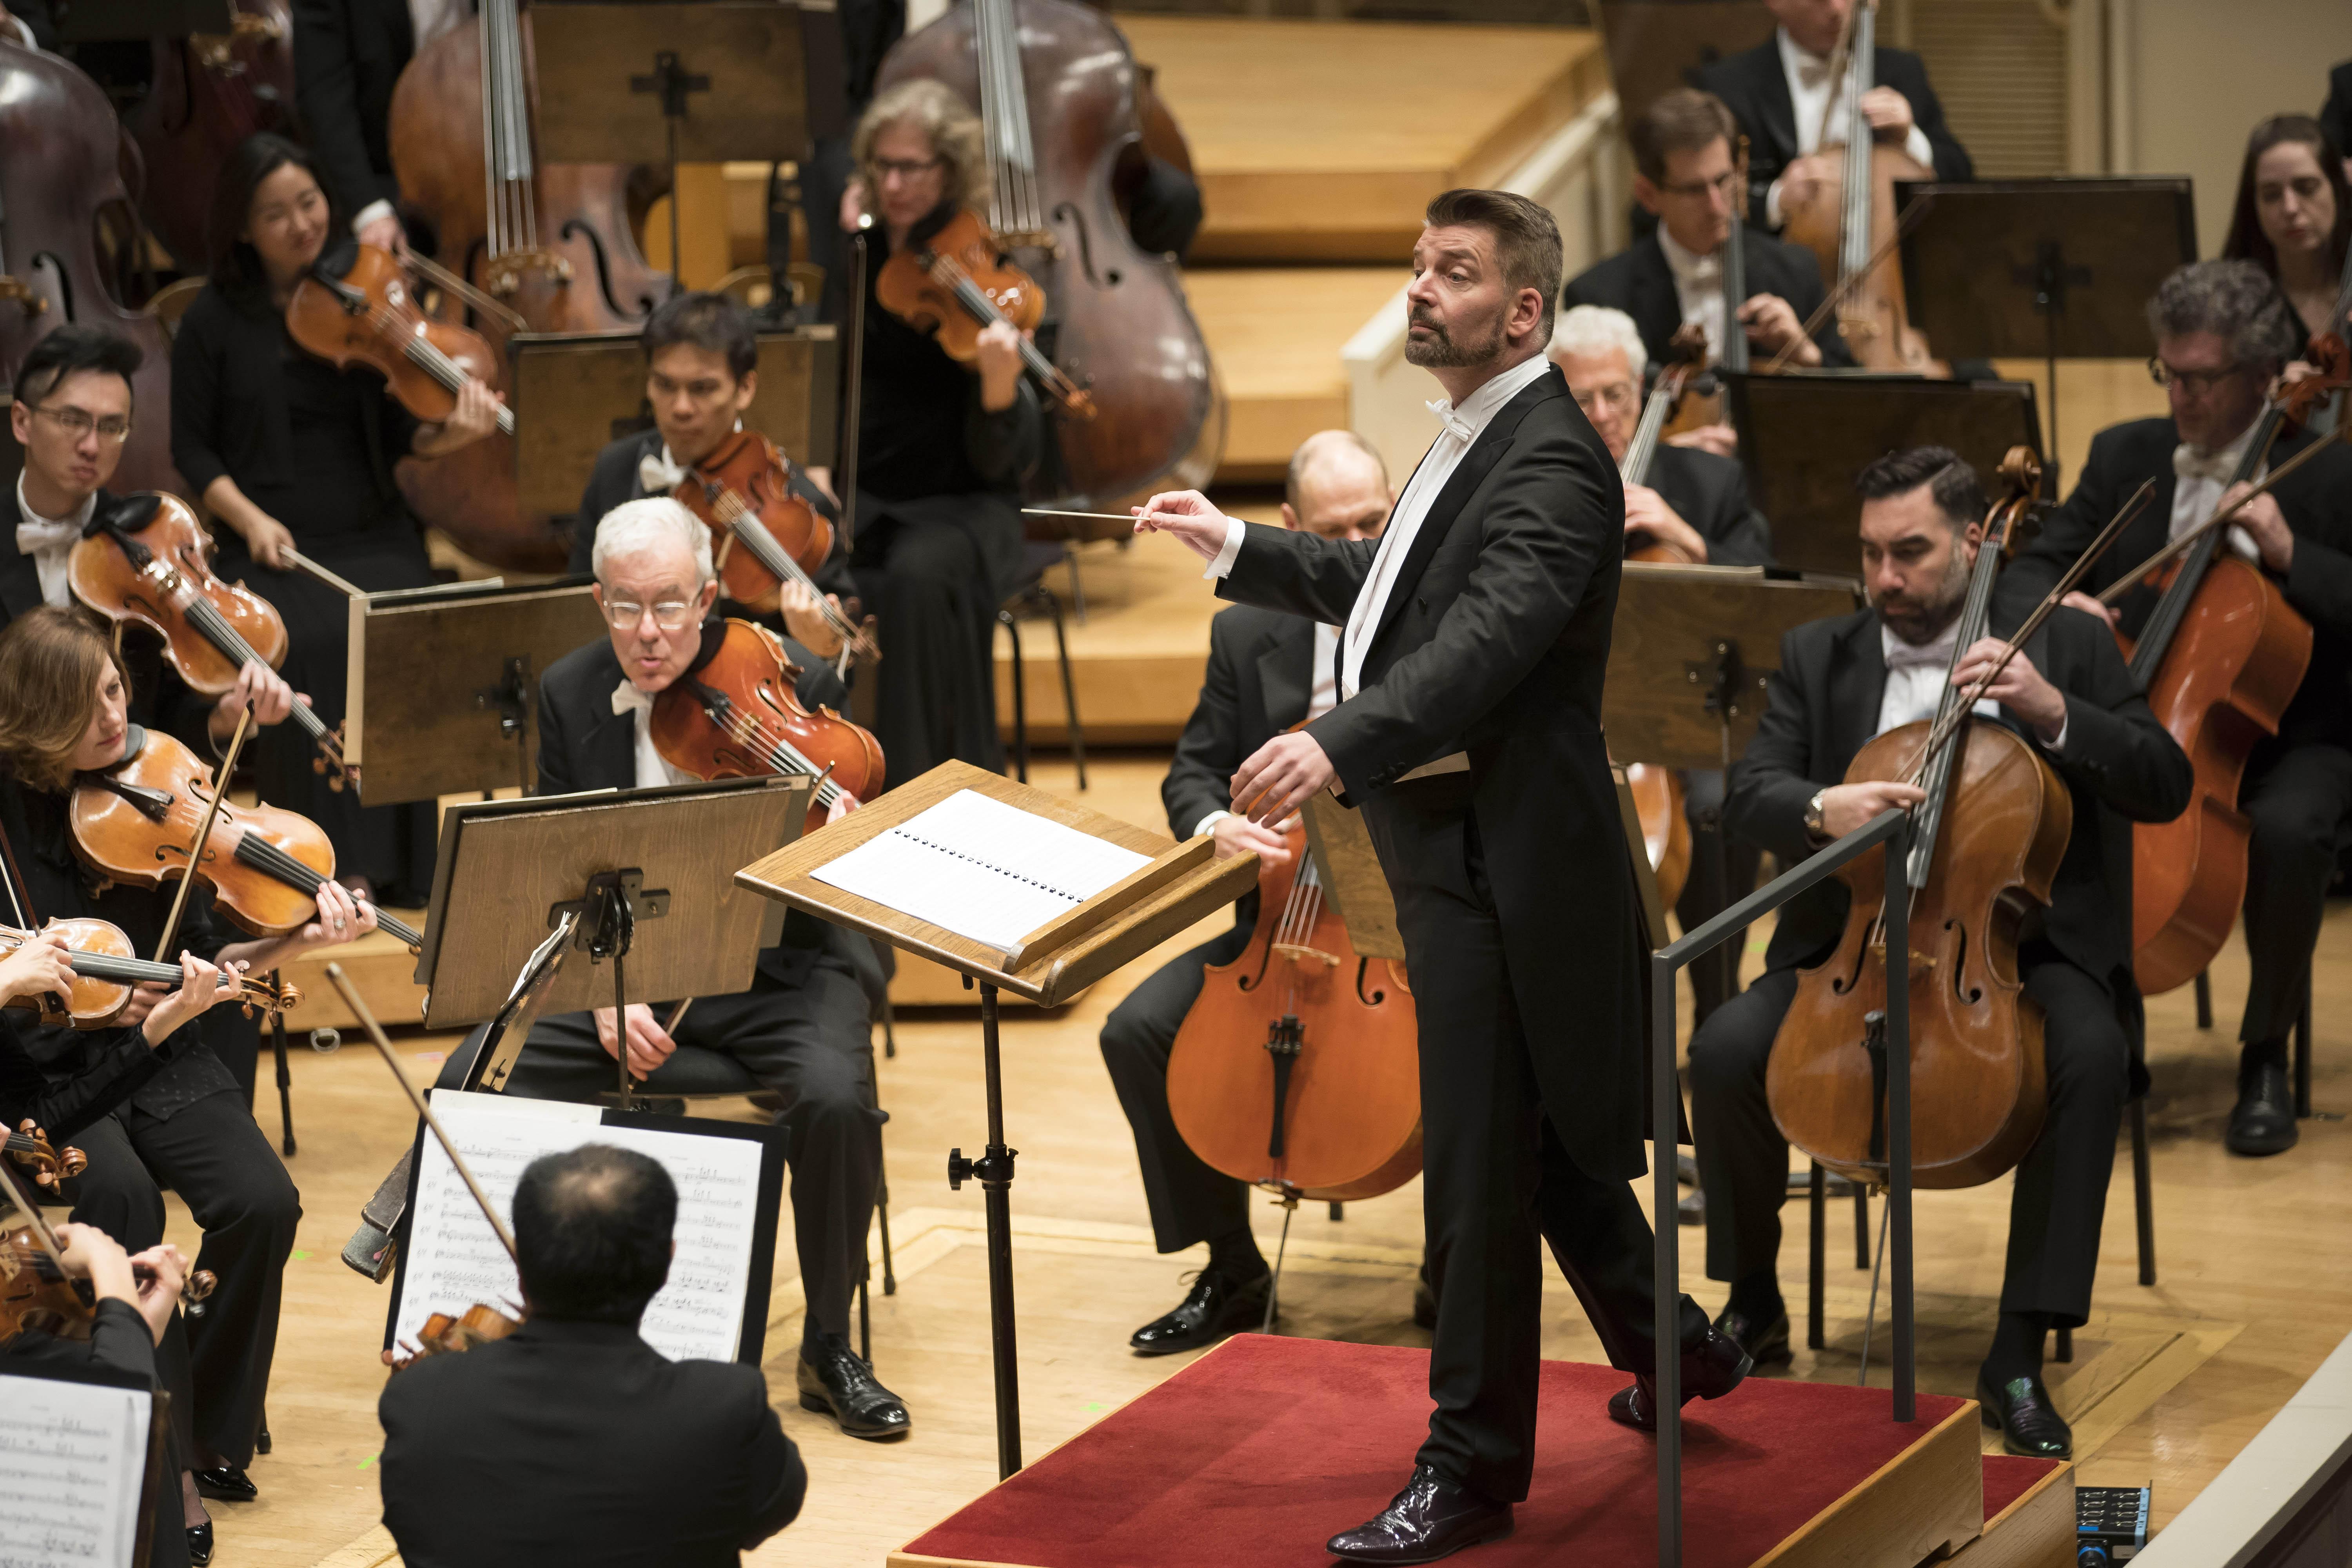 Guest conductor Matthias Pintscher leads the CSO in Ravel’s orchestration of Debussy’s “Saraband and Danse.” (Photo © Todd Rosenberg)